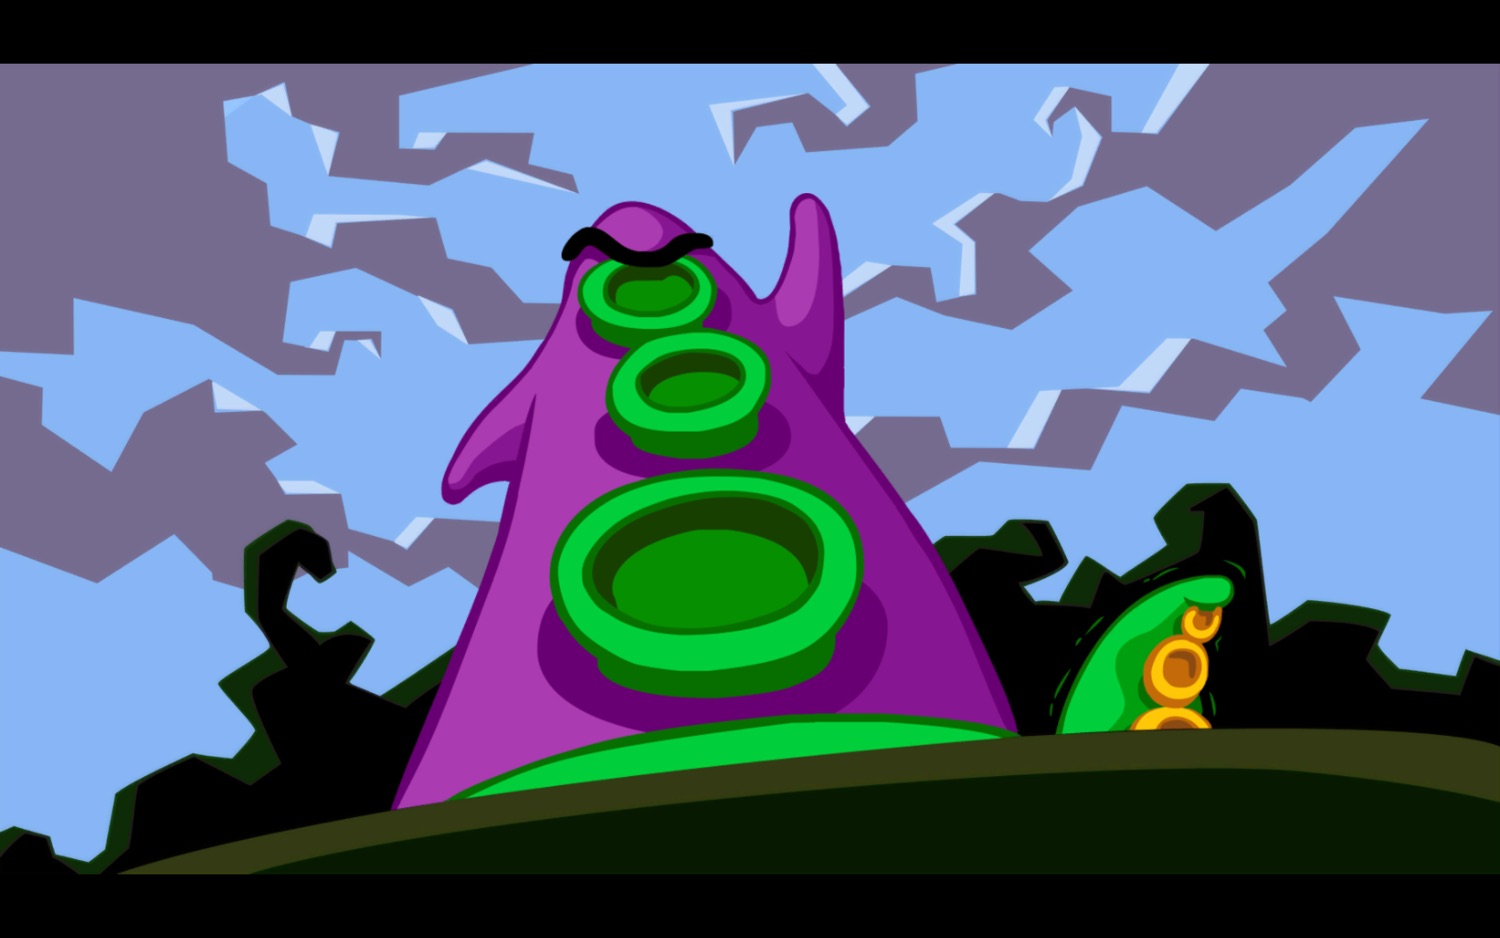 Screenshot from Day of the Tentacle showing Purple Tentacle getting his hands. It’s a worm’s eye view and we’re looking up at him as he threatens to take over the world. In the background, Green Tentacle is quivering.